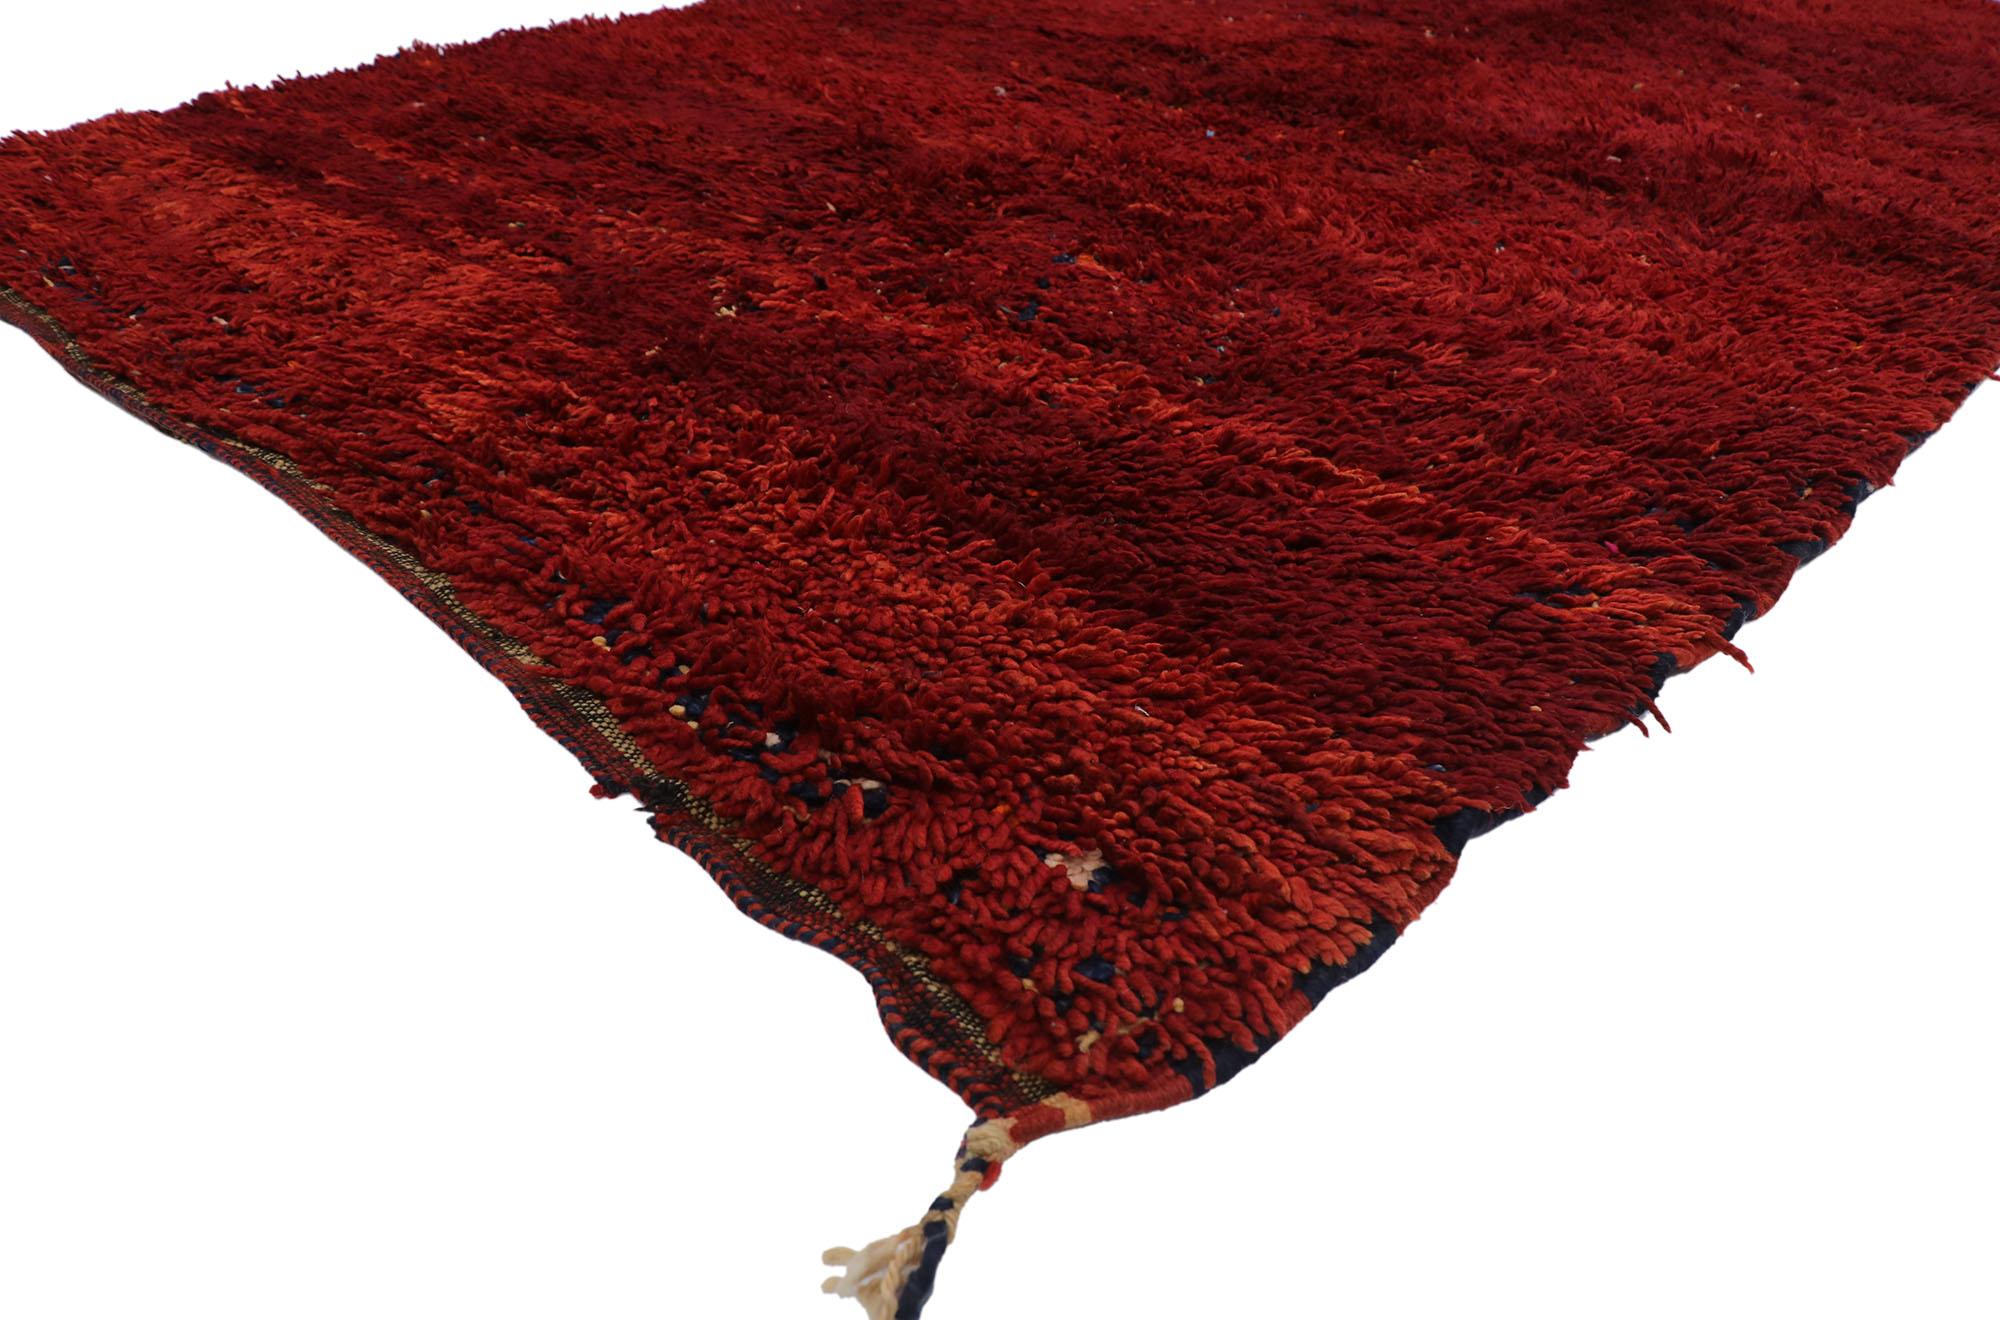 21270 vintage Berber red Beni M'Guild Moroccan rug with Tribal style 06'10 x 10'04. With its simplicity, plush pile and tribal style, this hand knotted wool vintage Beni M'Guild Moroccan rug is a captivating vision of woven beauty. The abrashed red